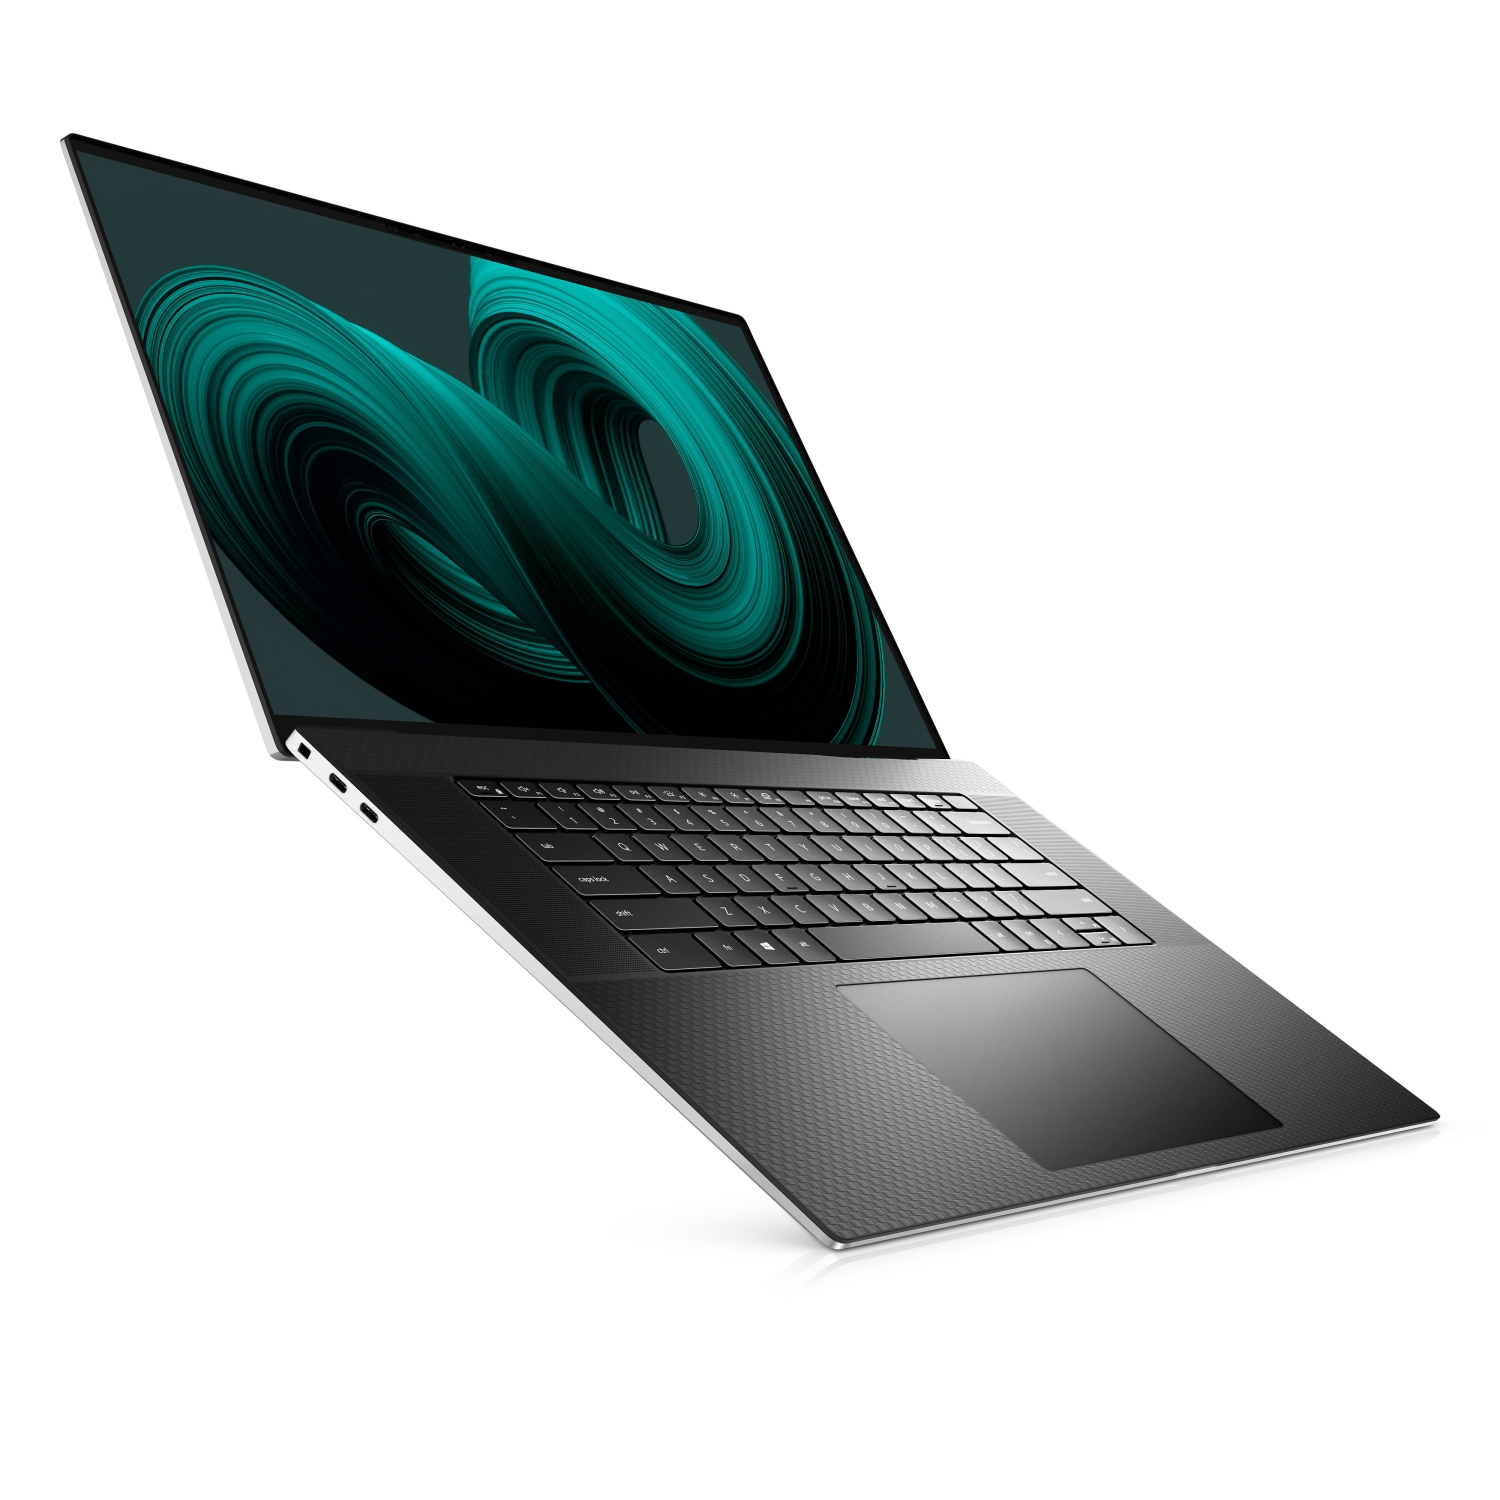 Refurbished (Excellent) - Dell XPS 17 9710 Laptop (2021) | 17" FHD+ | Core i9 - 2TB SSD - 32GB RAM - RTX 3060 | 8 Cores @ 4.9 GHz - 11th Gen CPU Certified Refurbished